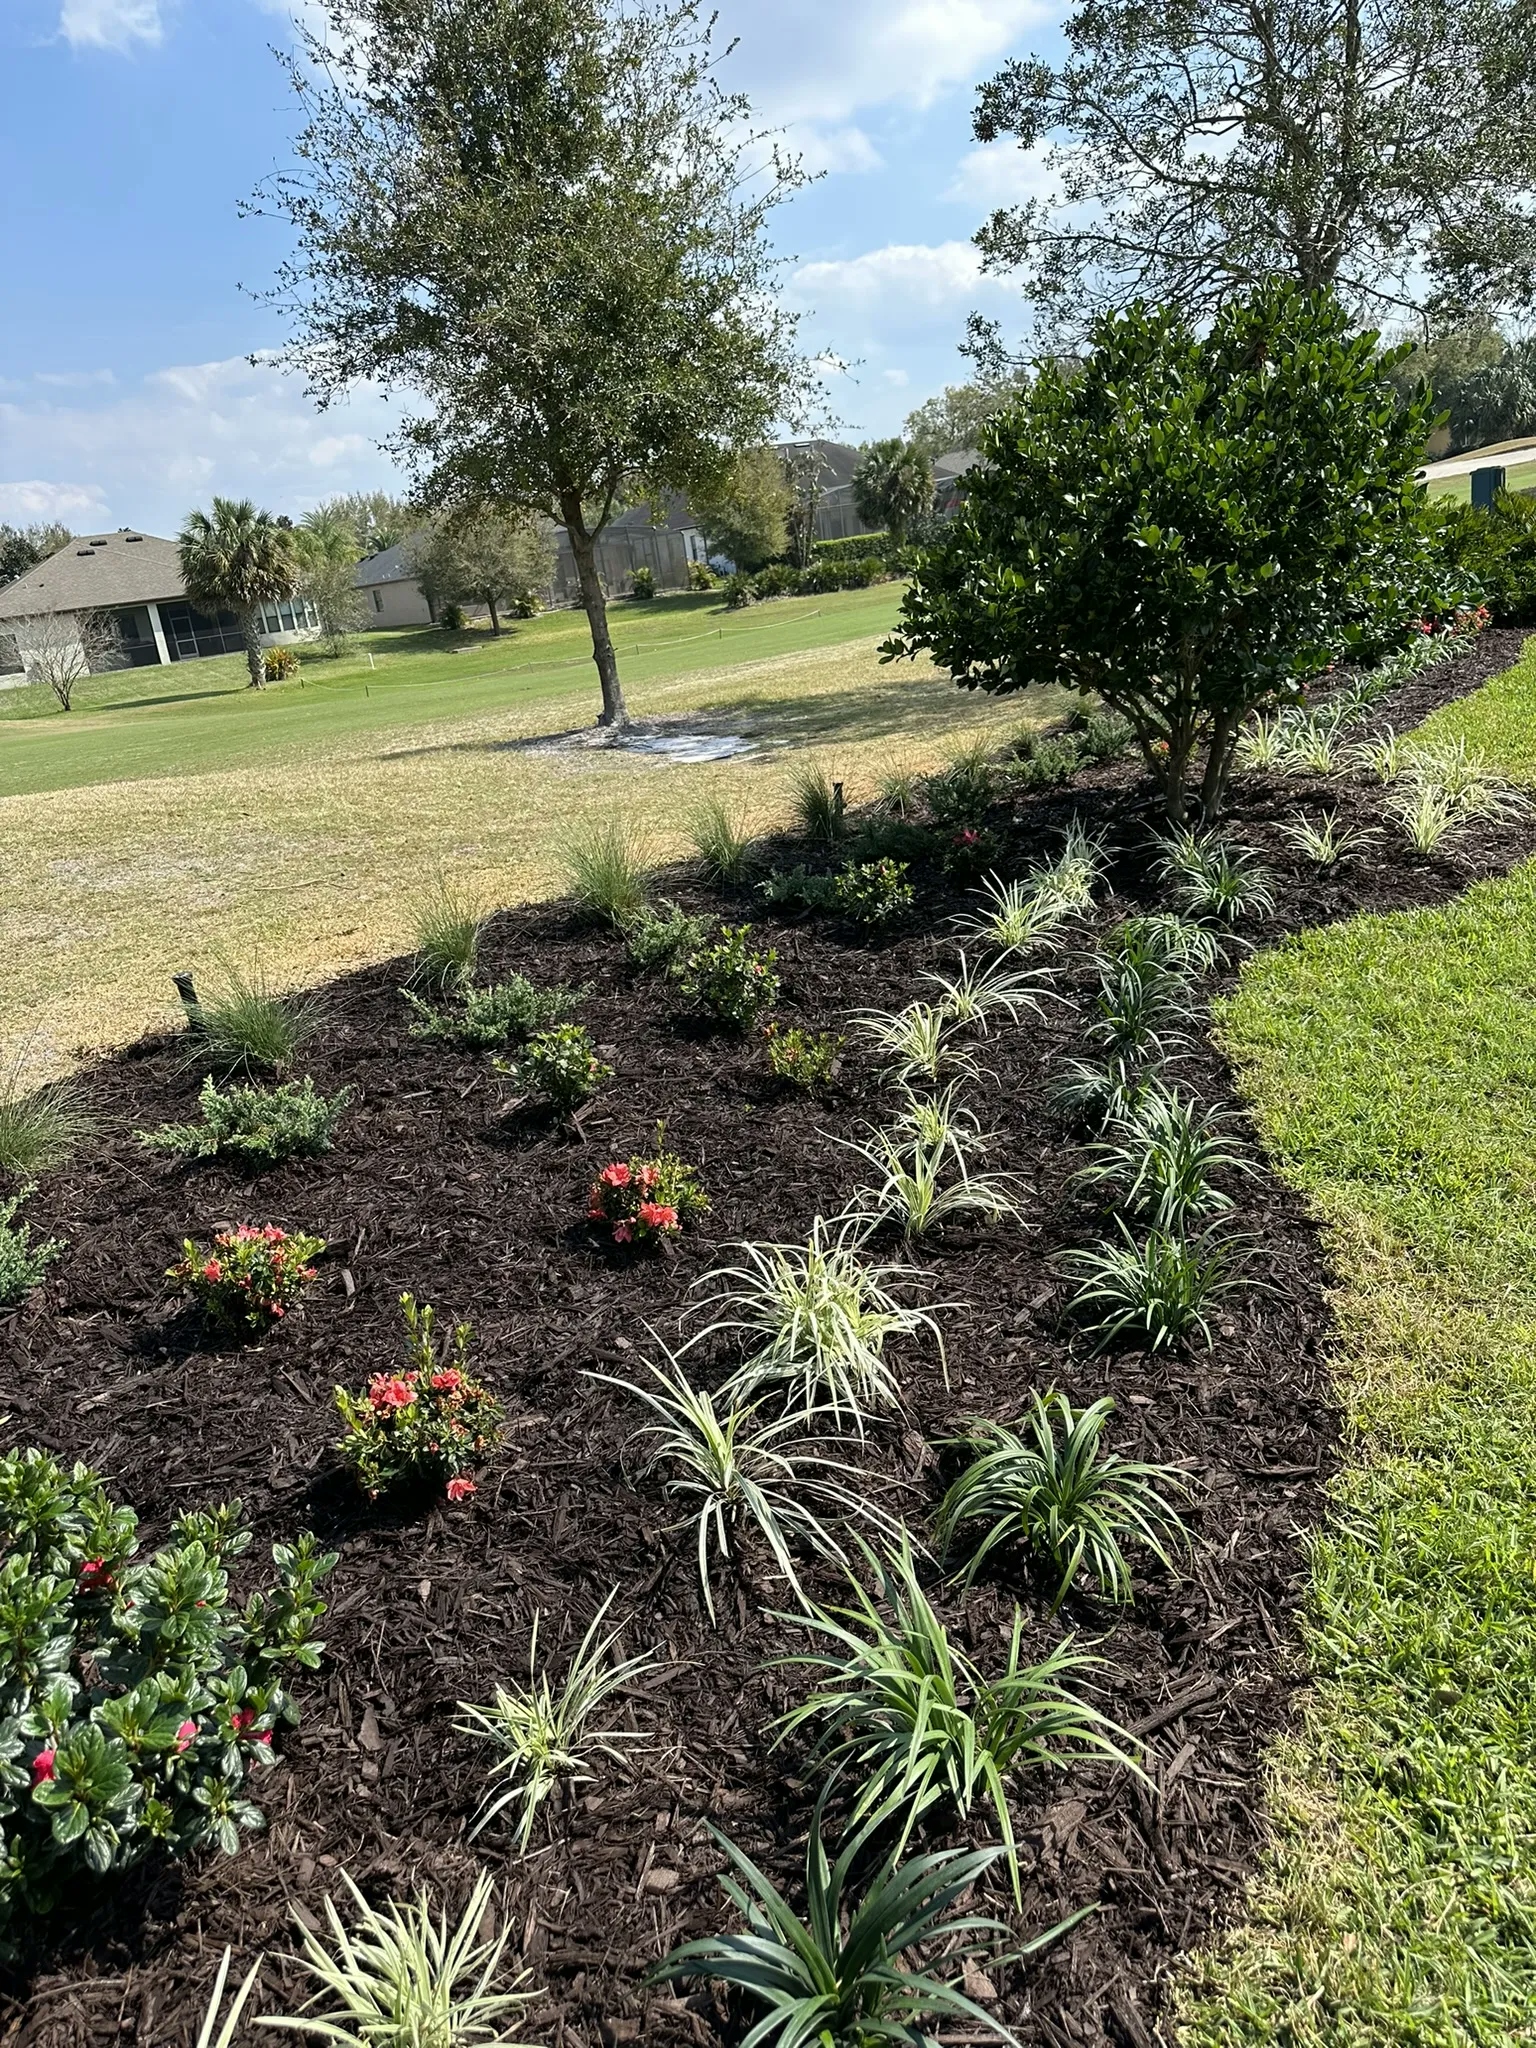 A sprinkler system is installed in a mulch bed next to a golf course. The mulch bed has newly planted shrubs and ground cover.